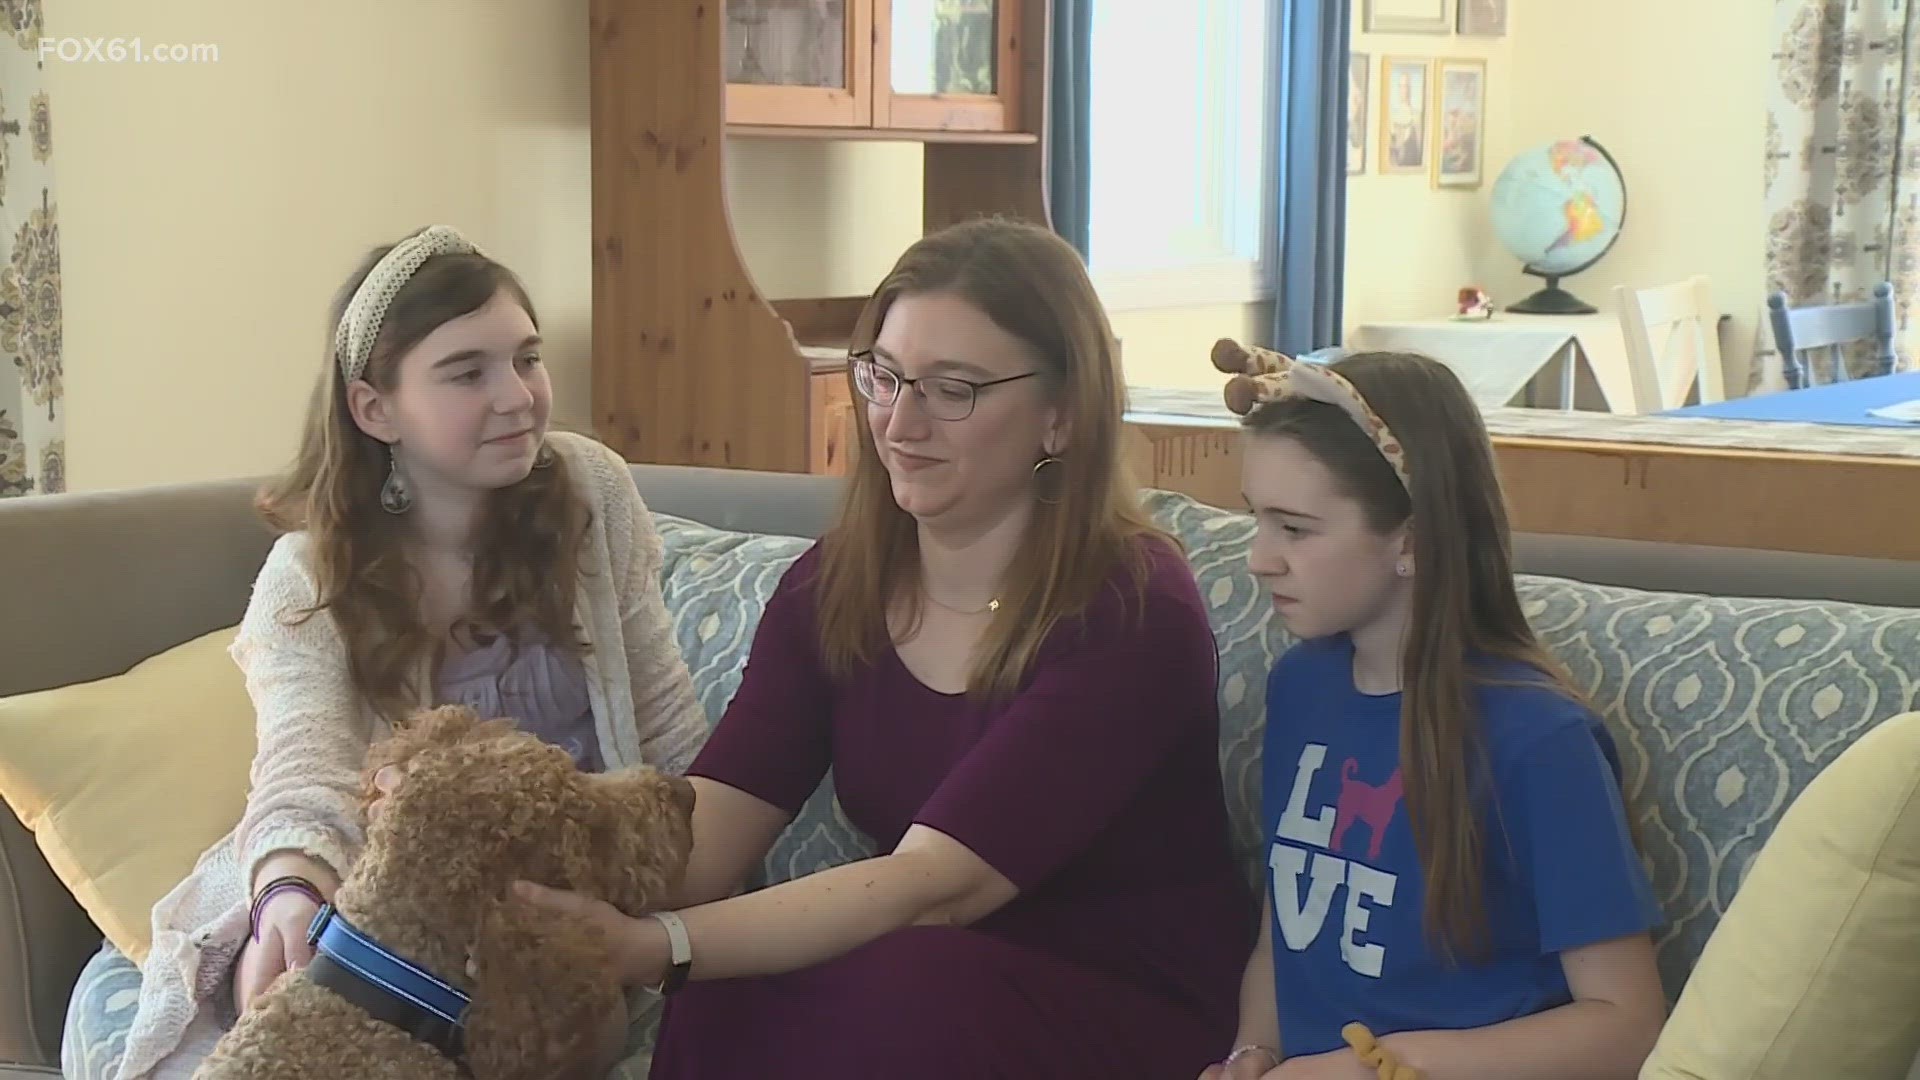 A Wolcott girl will soon have her own service dog that could change her life.